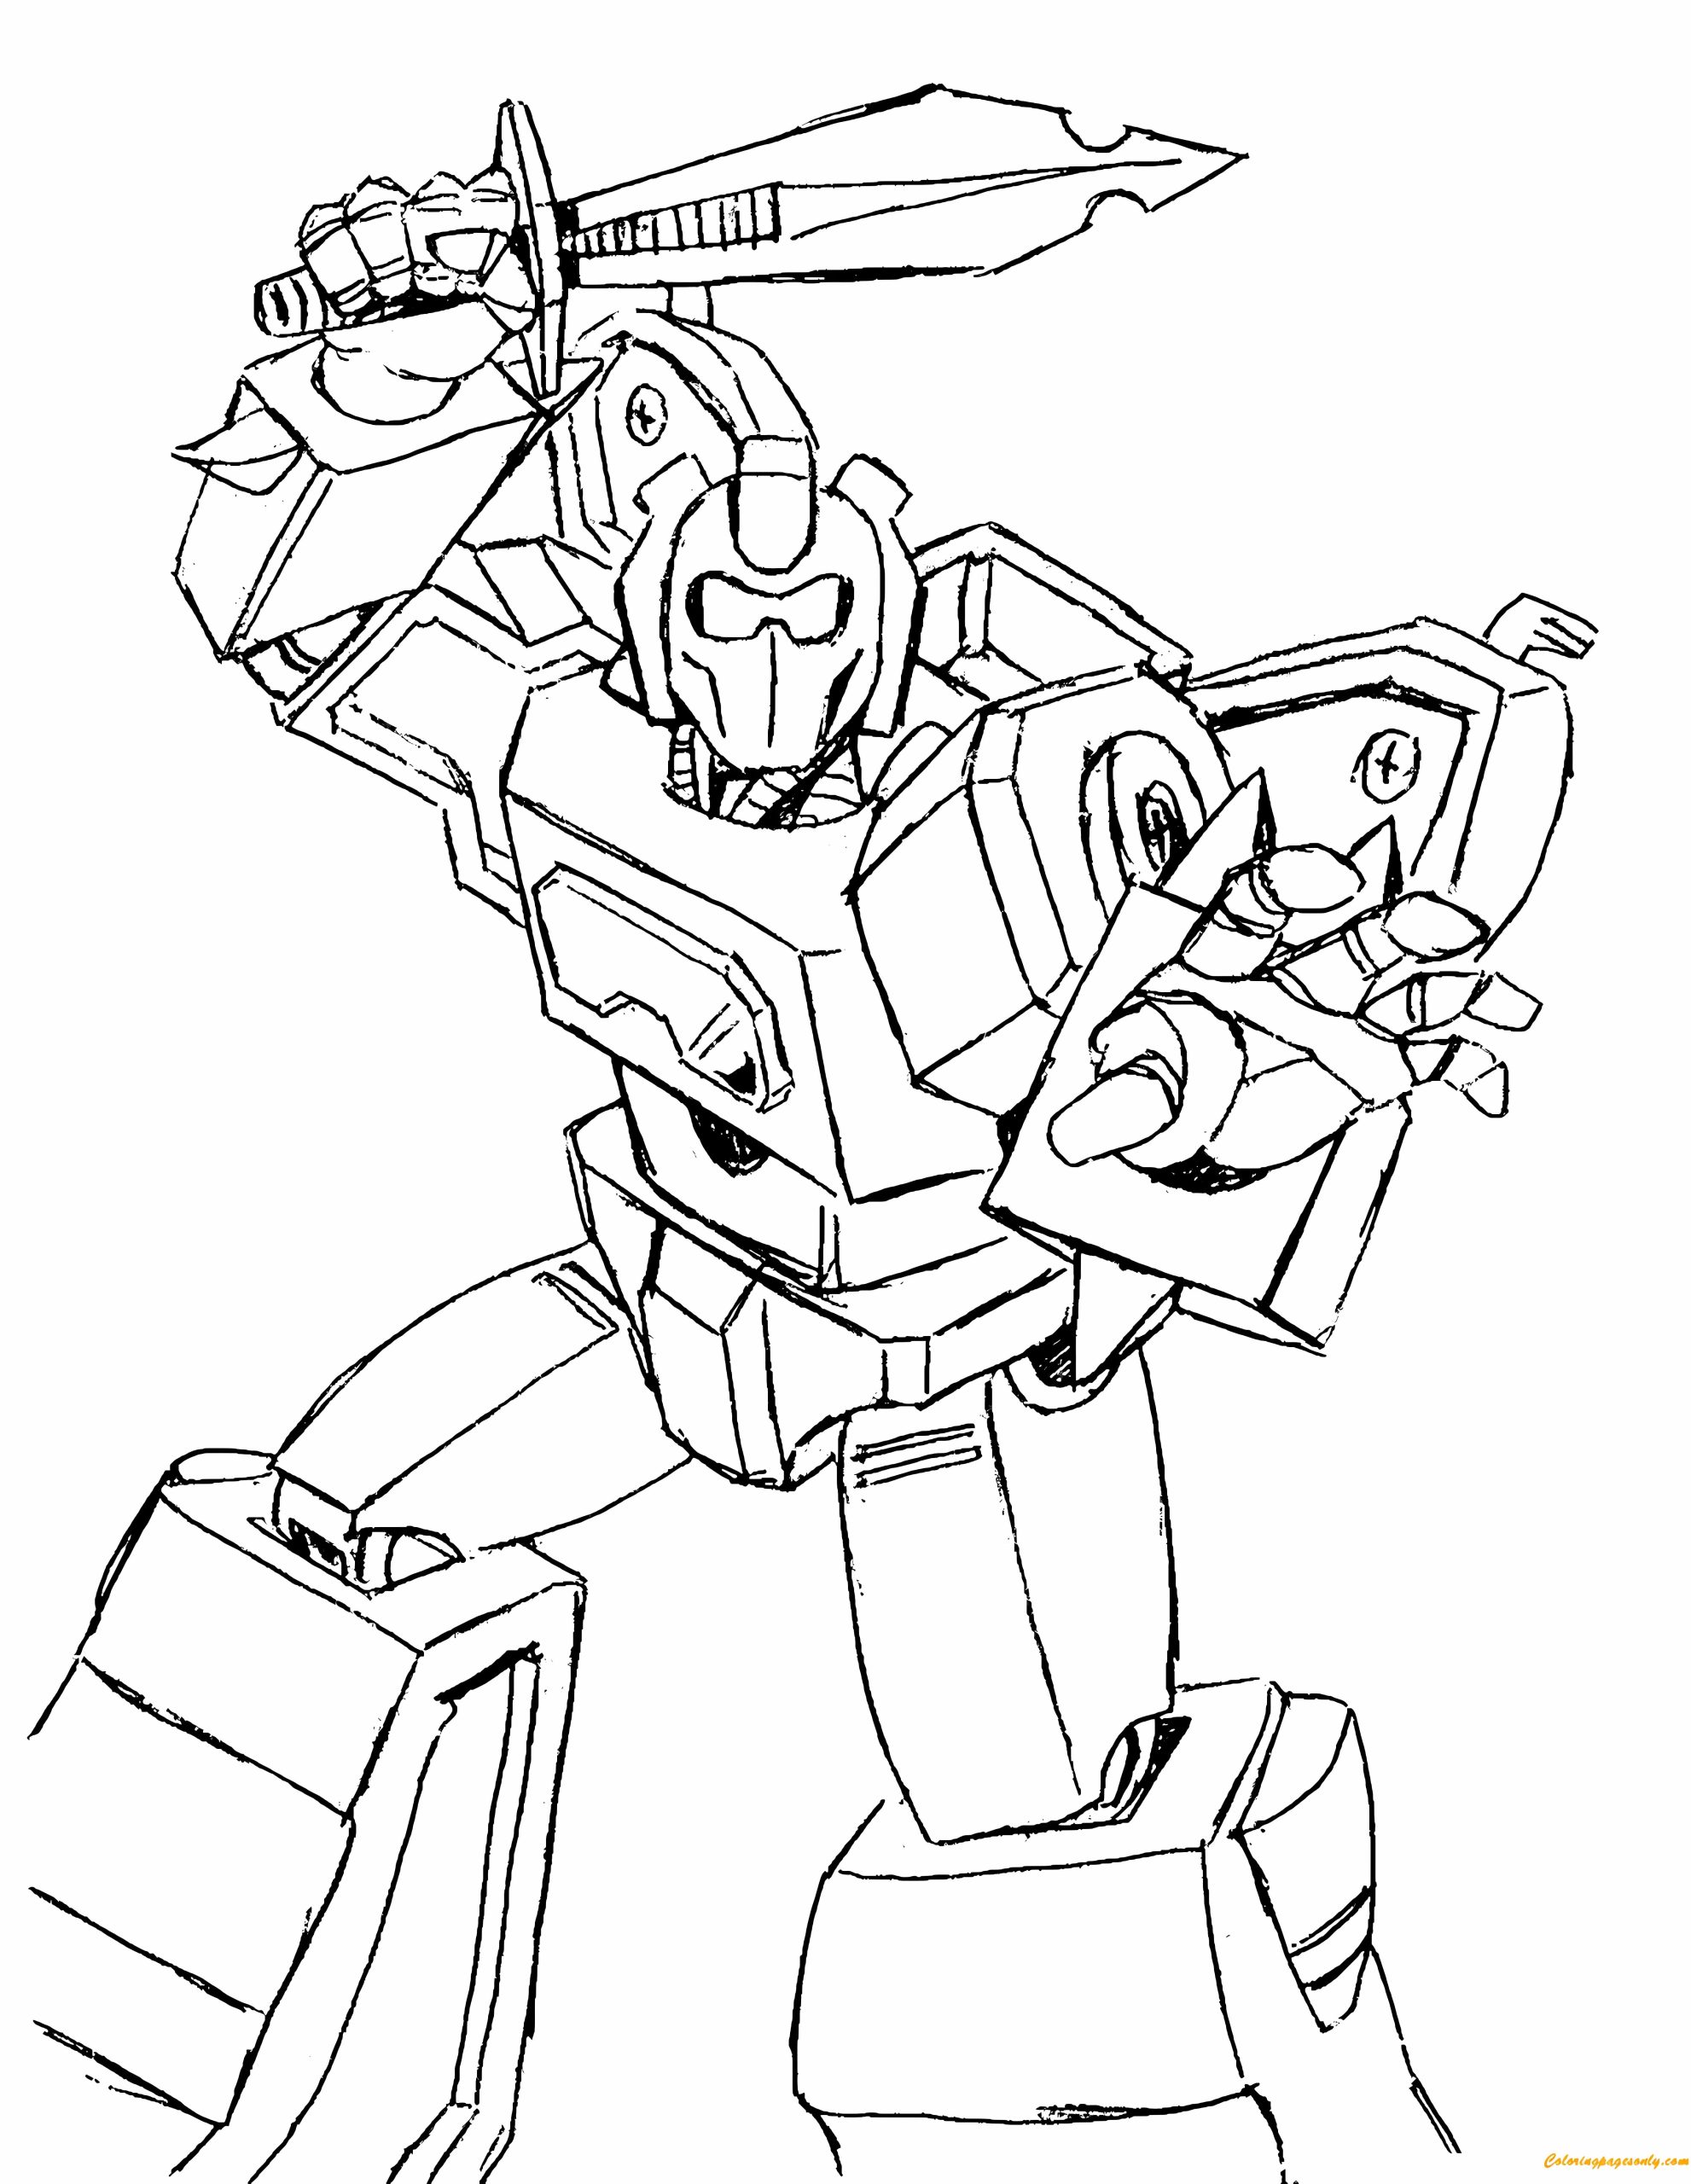 Transformers 3 Fighting Coloring Page